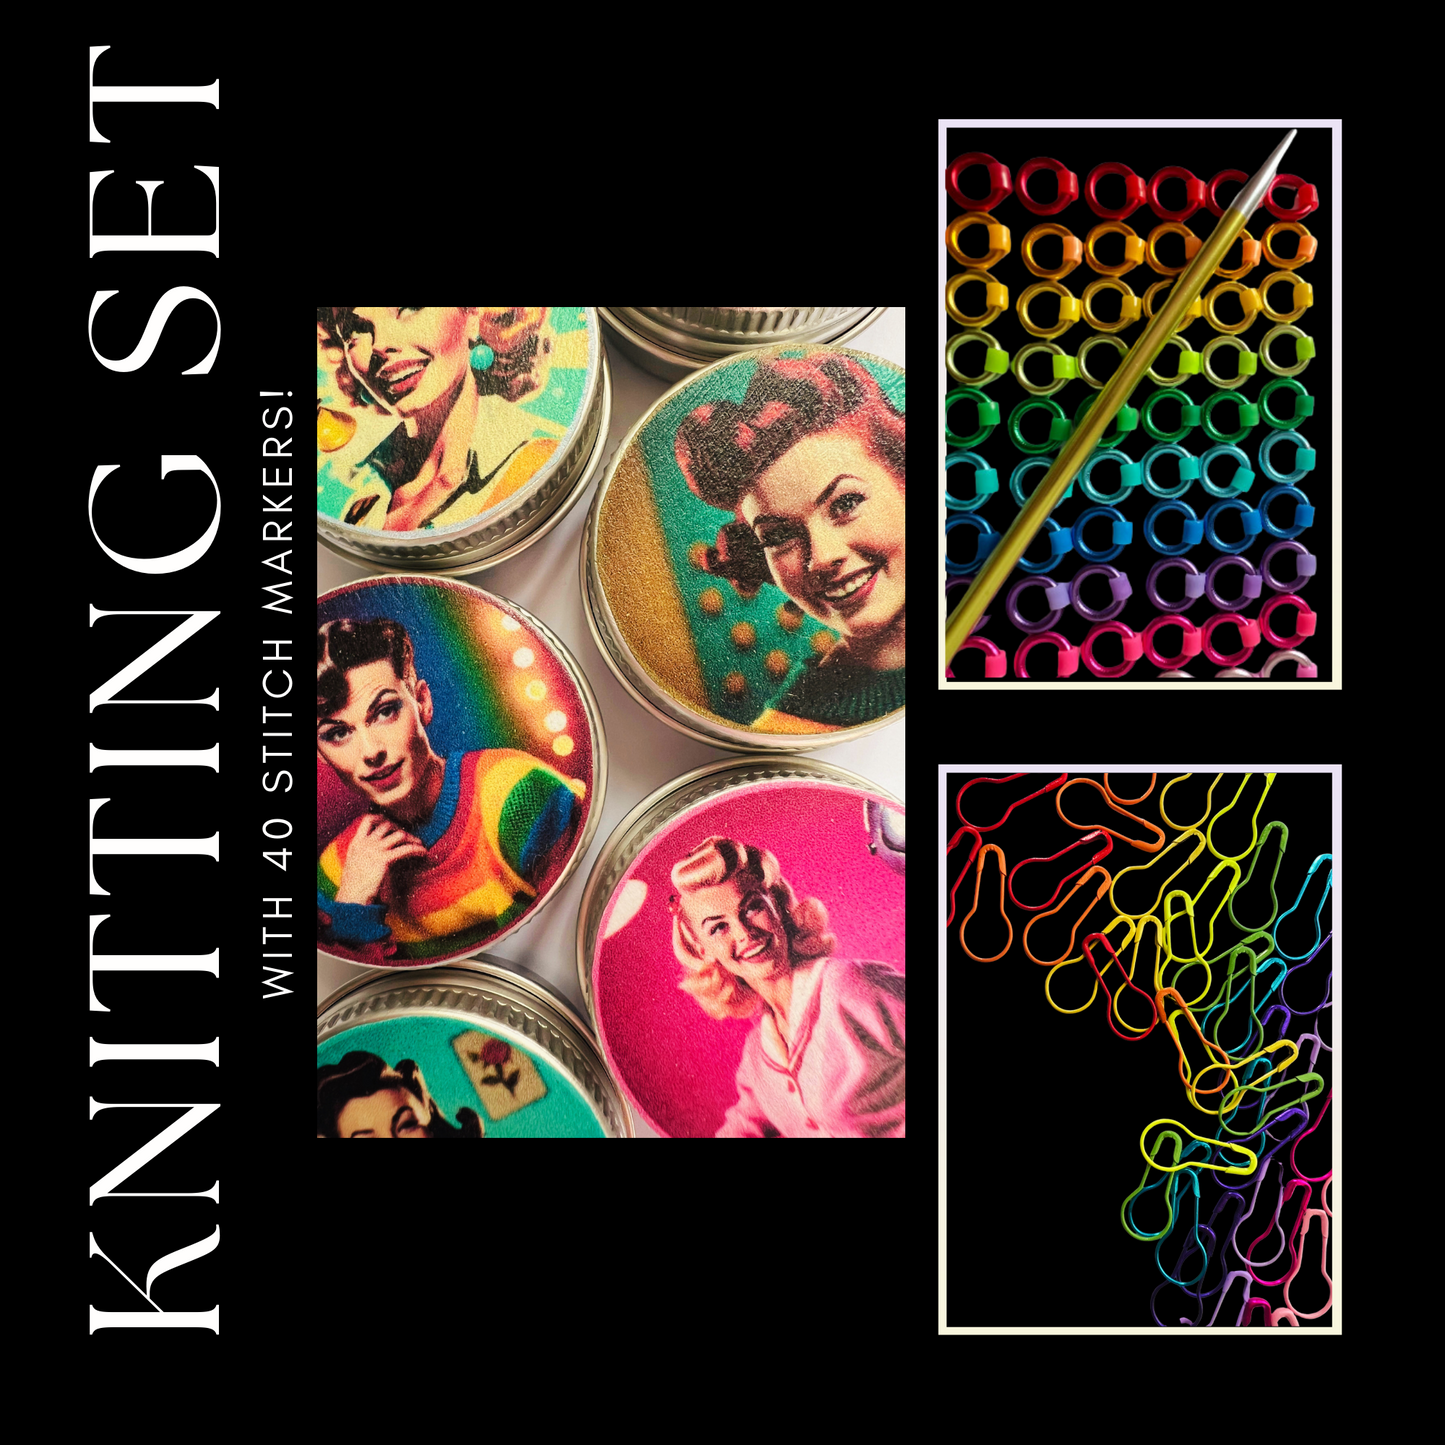 Knitting Set 40 Markers and Tin - RosyRetro Pin Up Pop Range